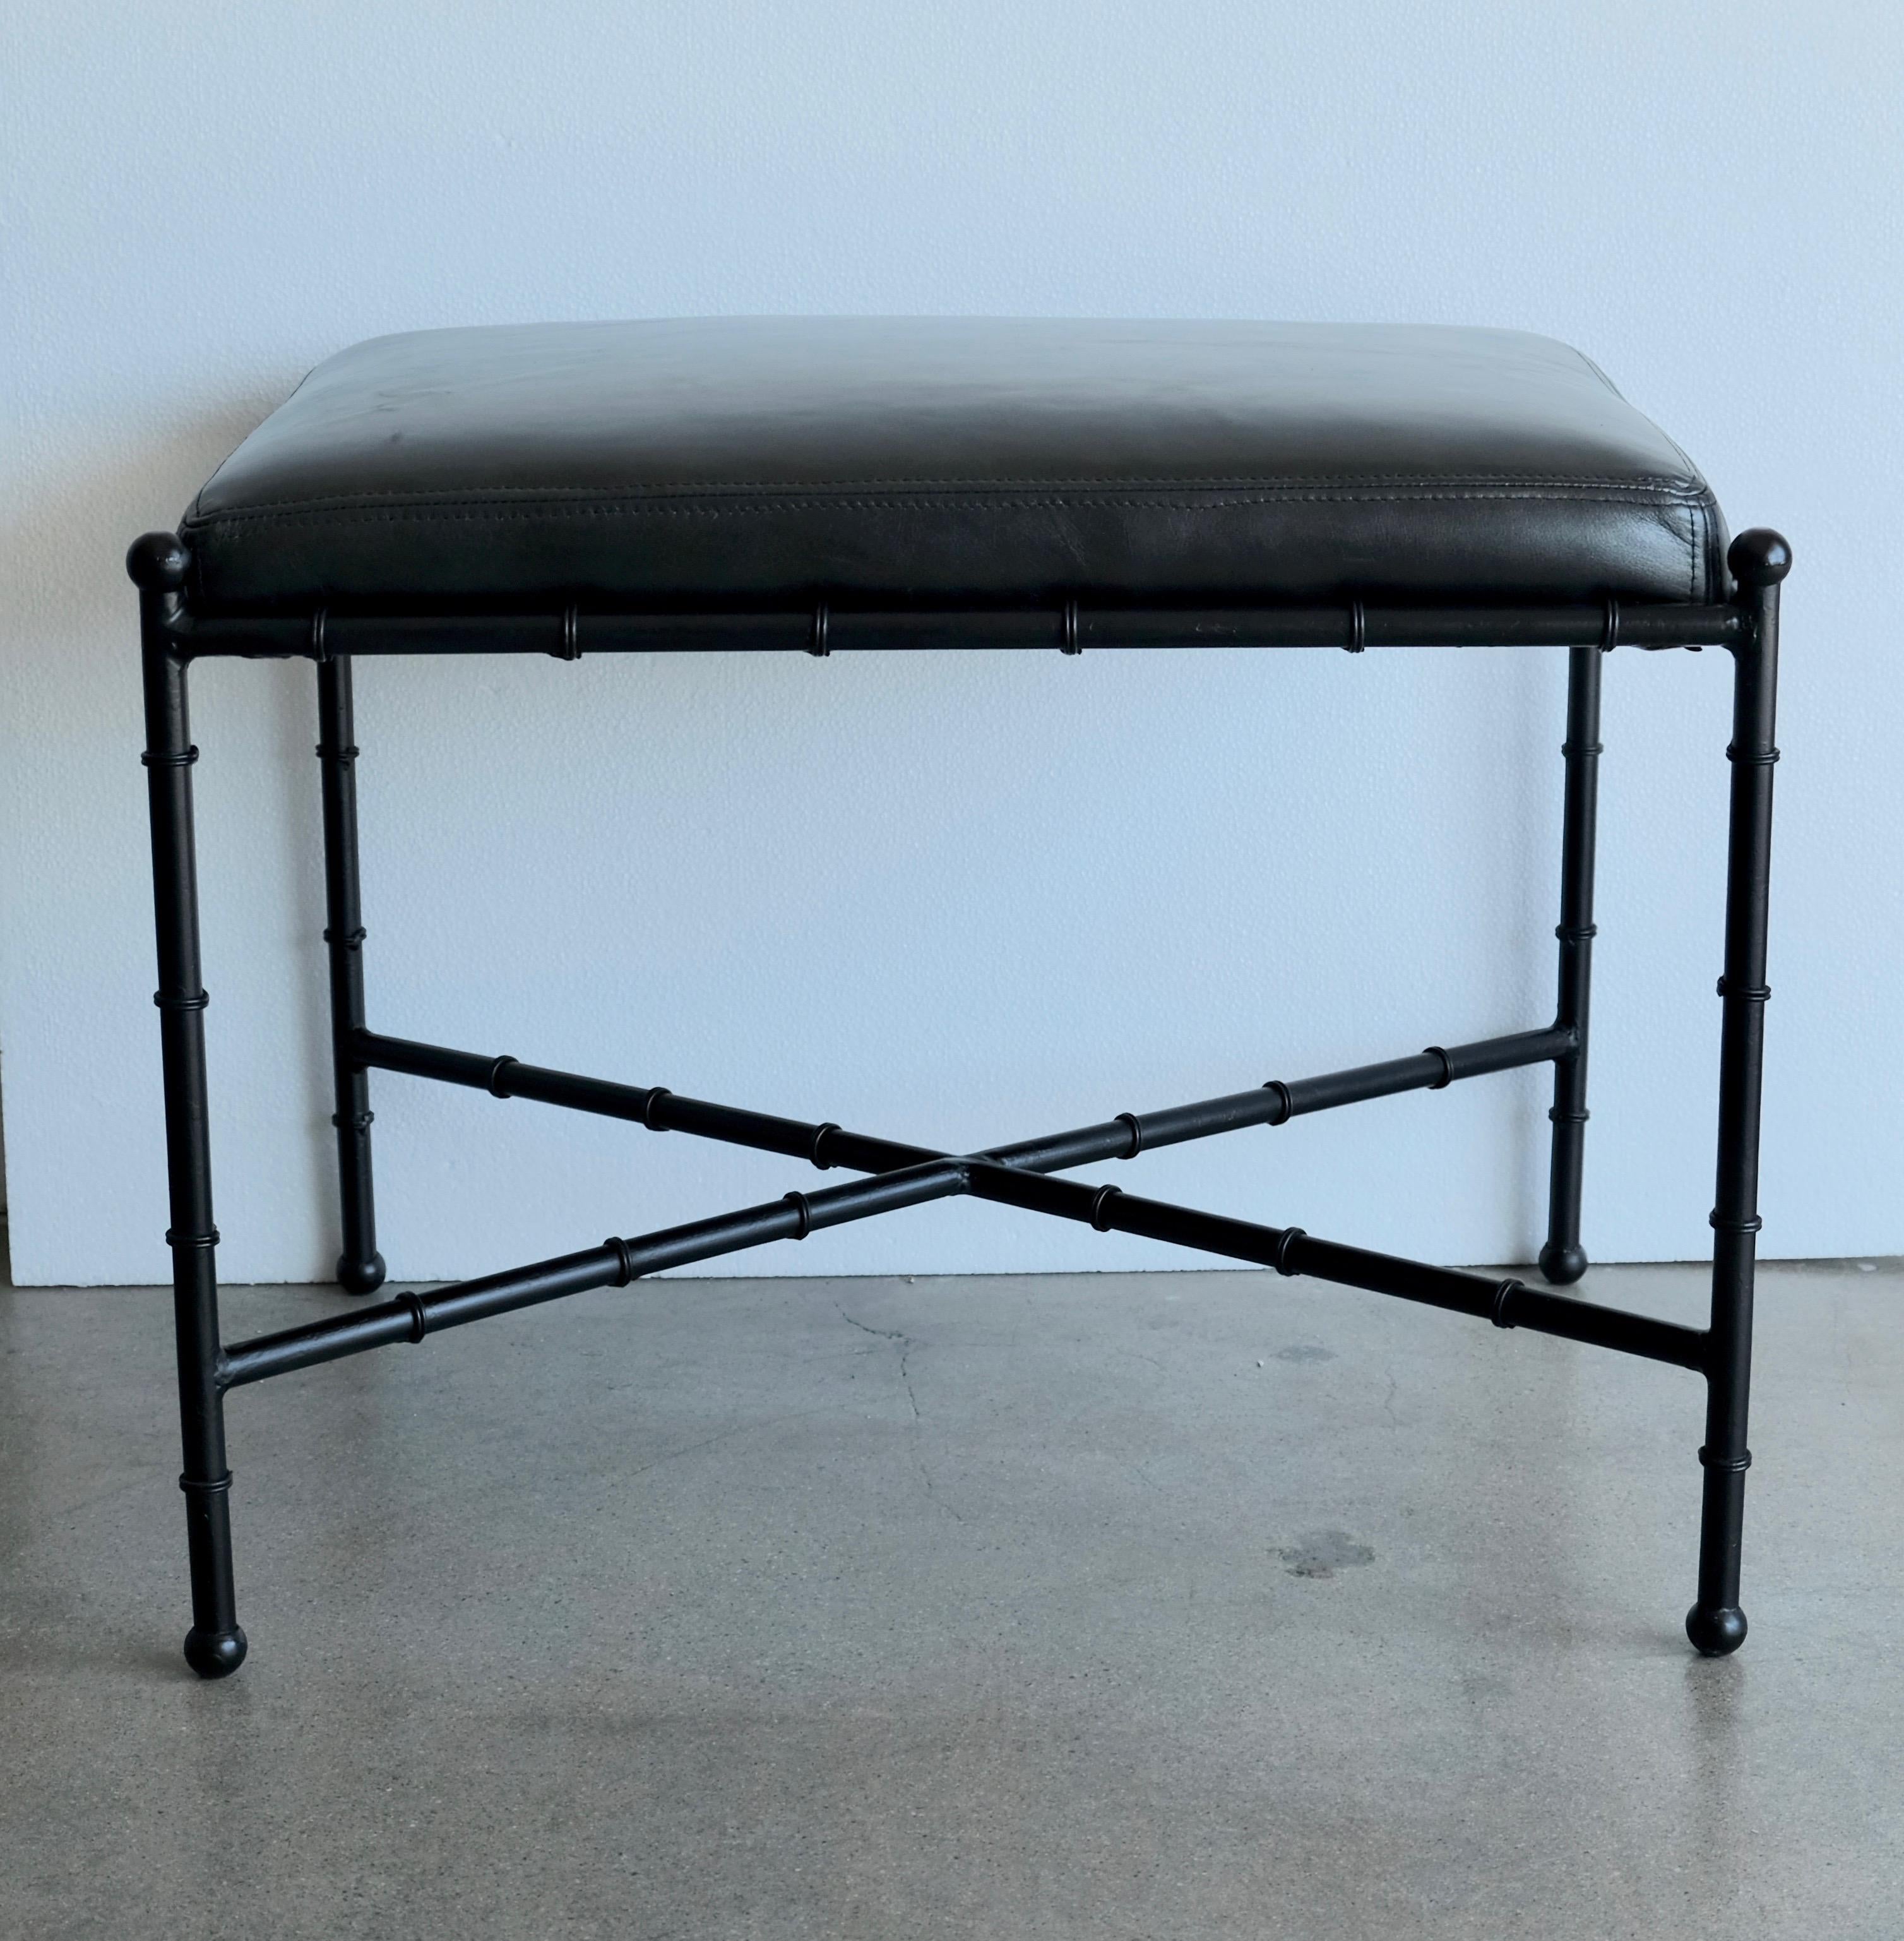 A restored vintage vanity stool or small bench. The metal base is fashioned in a bamboo style. The freshly upholstered fixed cushion is done in Italian black leather.